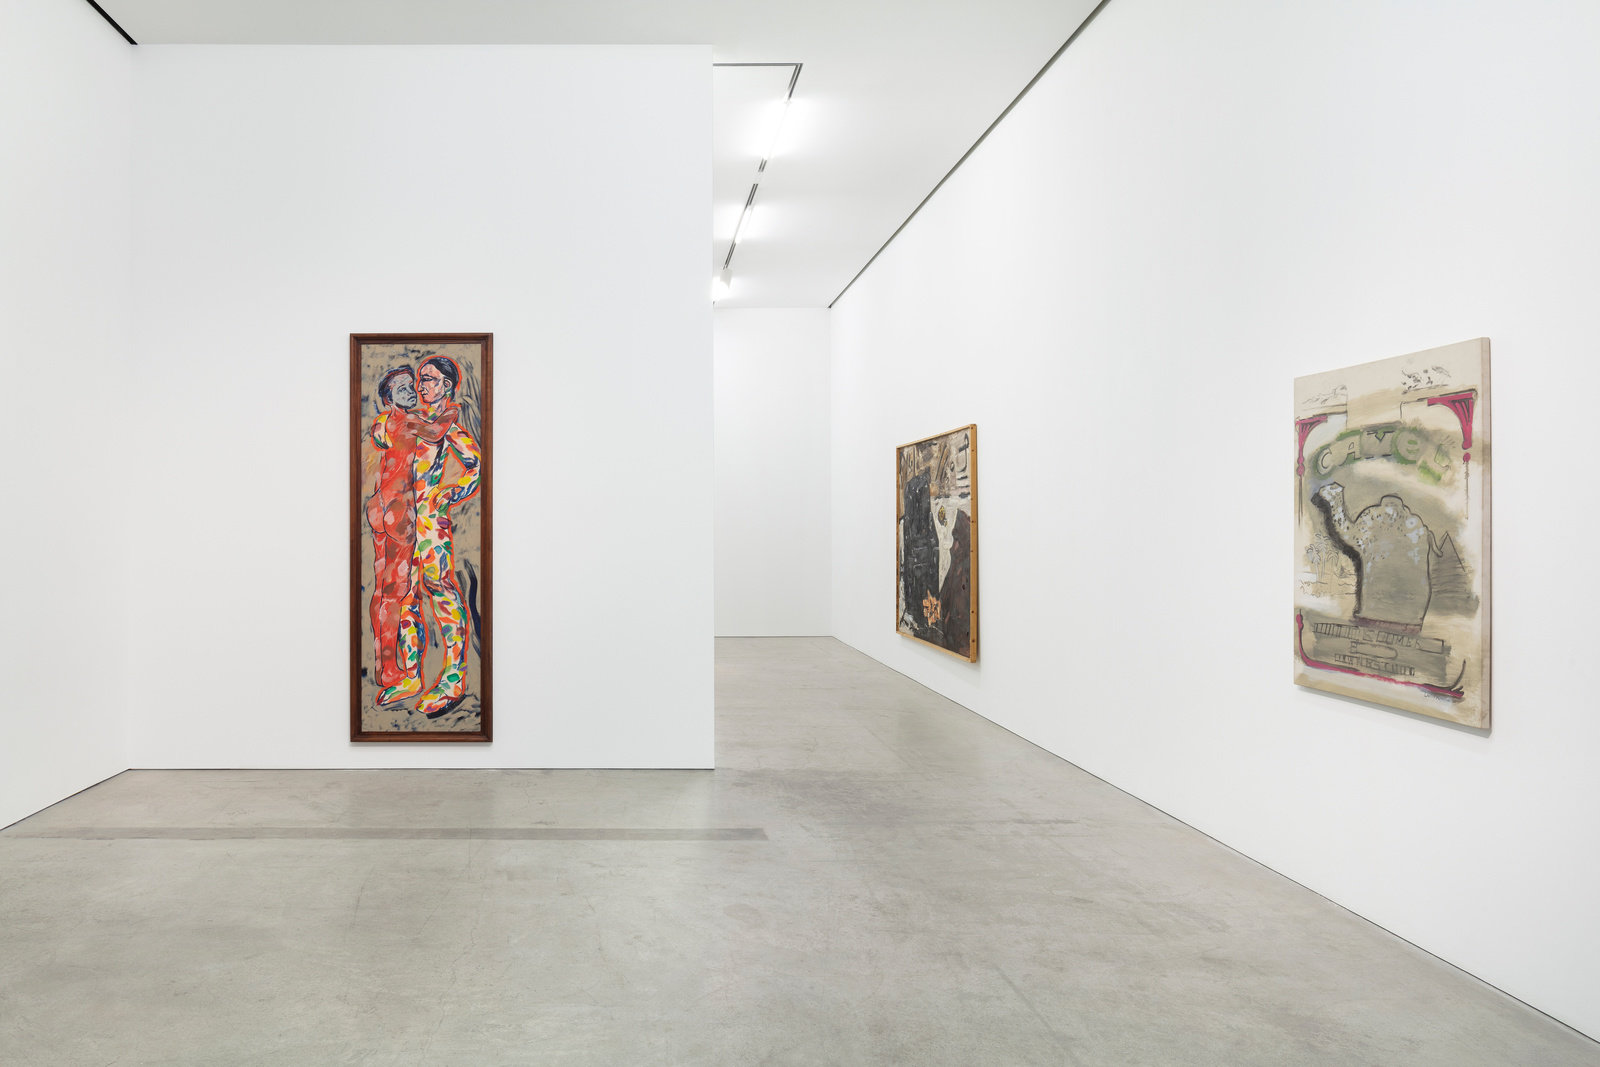 three paintings of different scales hung on the walls. One colorful painting of two figures embracing by RB Kitaj is tall and narrow. The remaining two are more subdued in their palette, by Werner Büttner and Larry Rivers. 